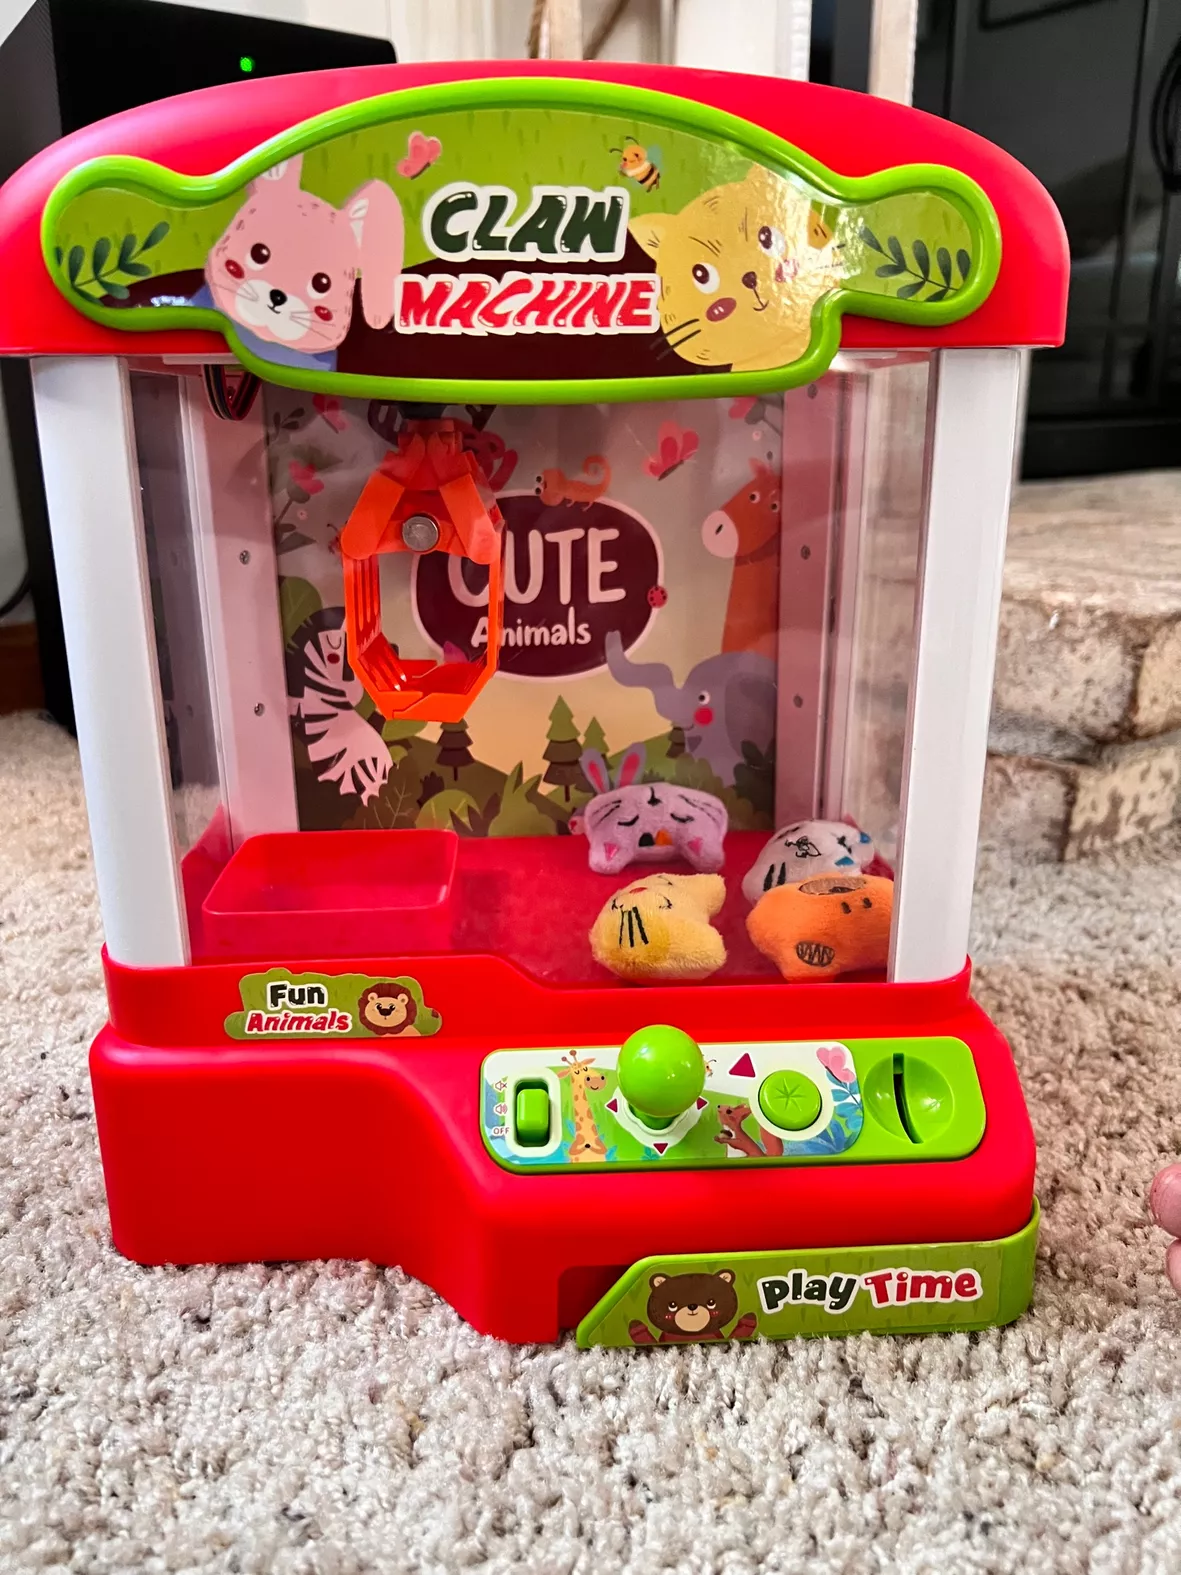 Mini Claw Machine For Kids - The Toy Grabber is Ideal for Children